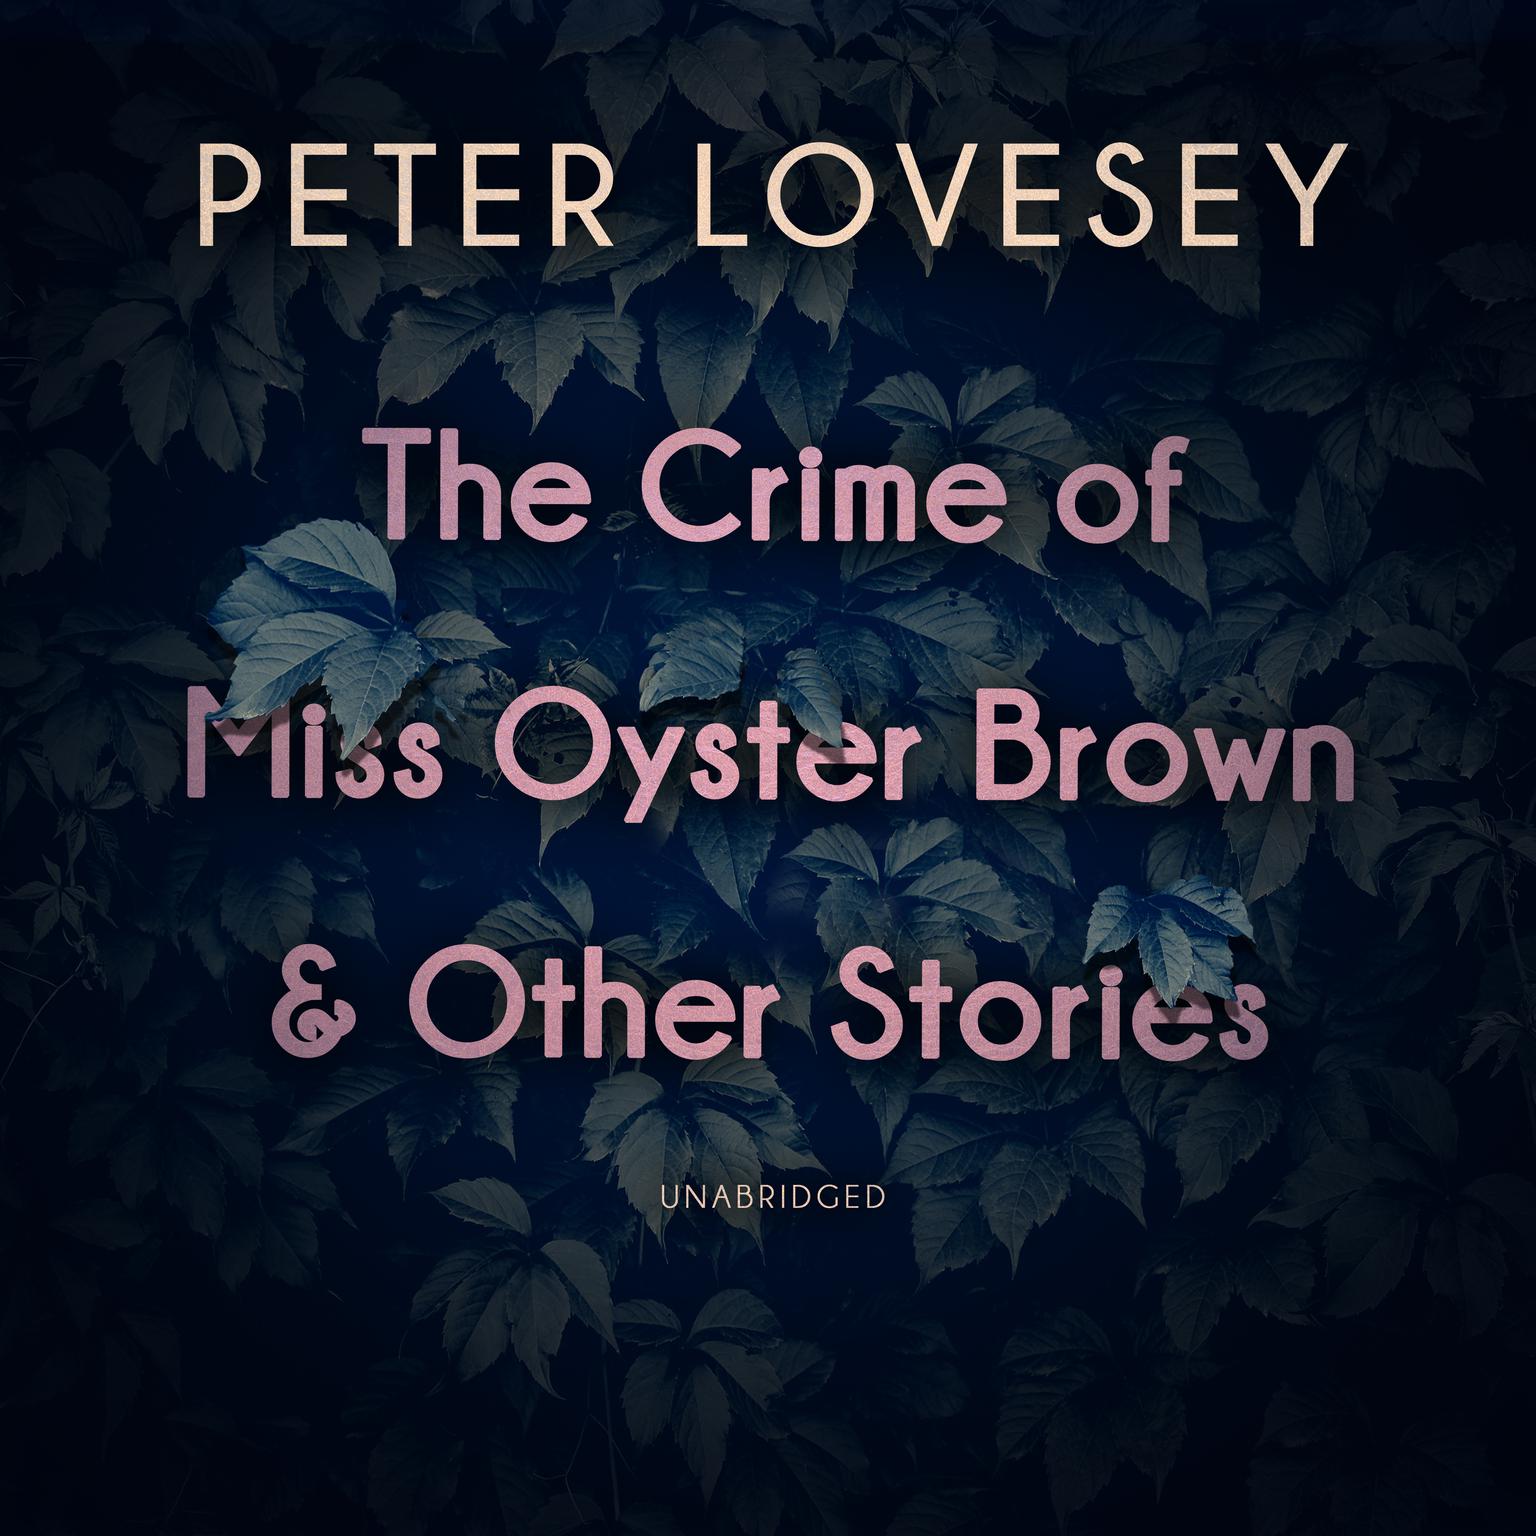 The Crime of Miss Oyster Brown, and Other Stories Audiobook, by Peter Lovesey